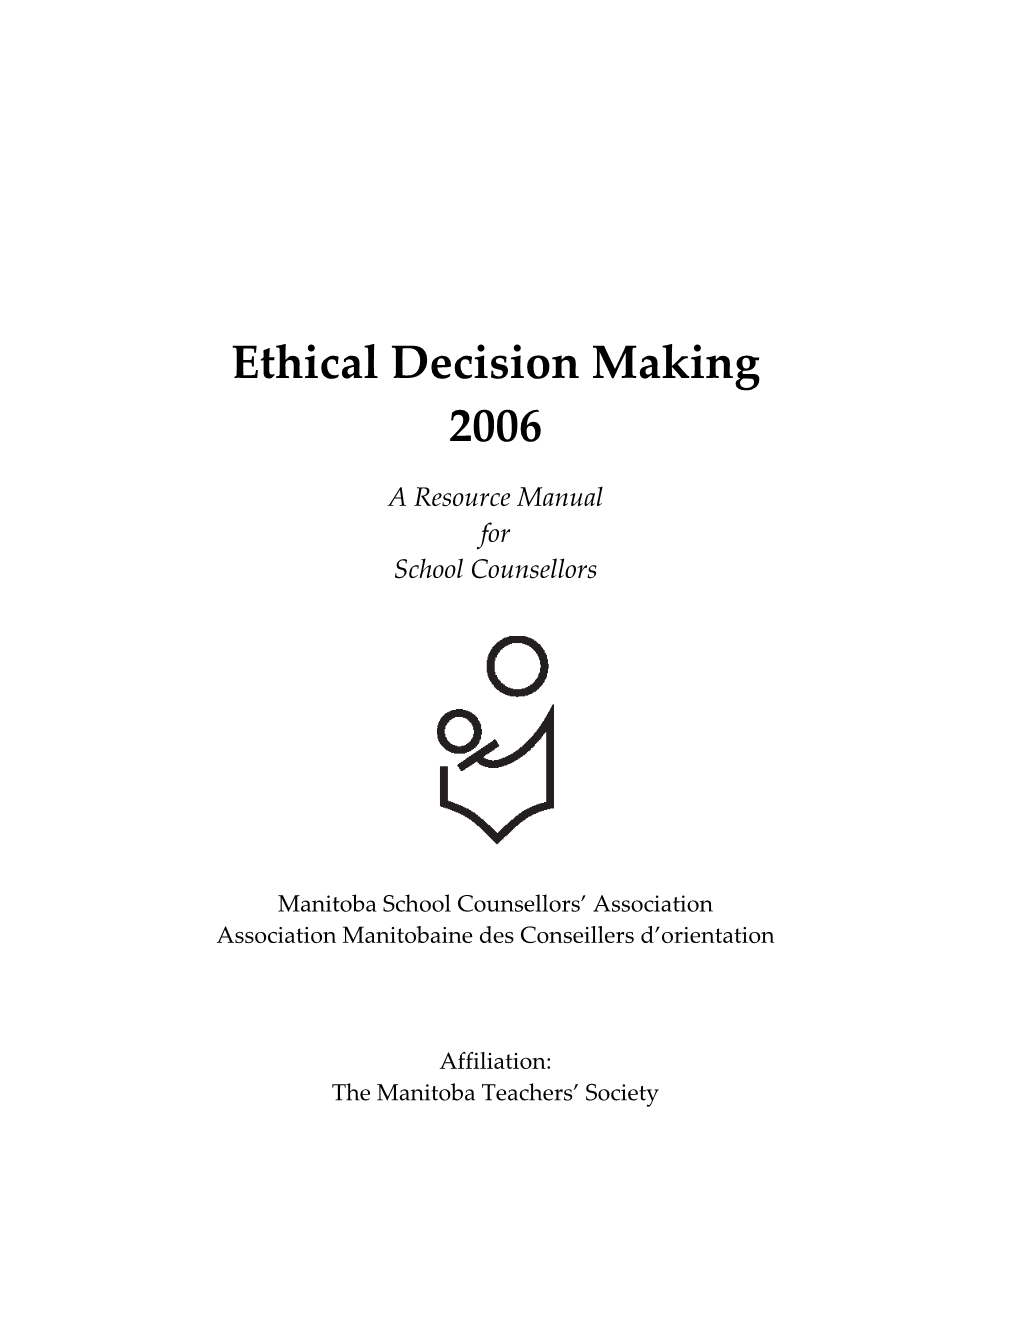 Ethical Decision Making 2006